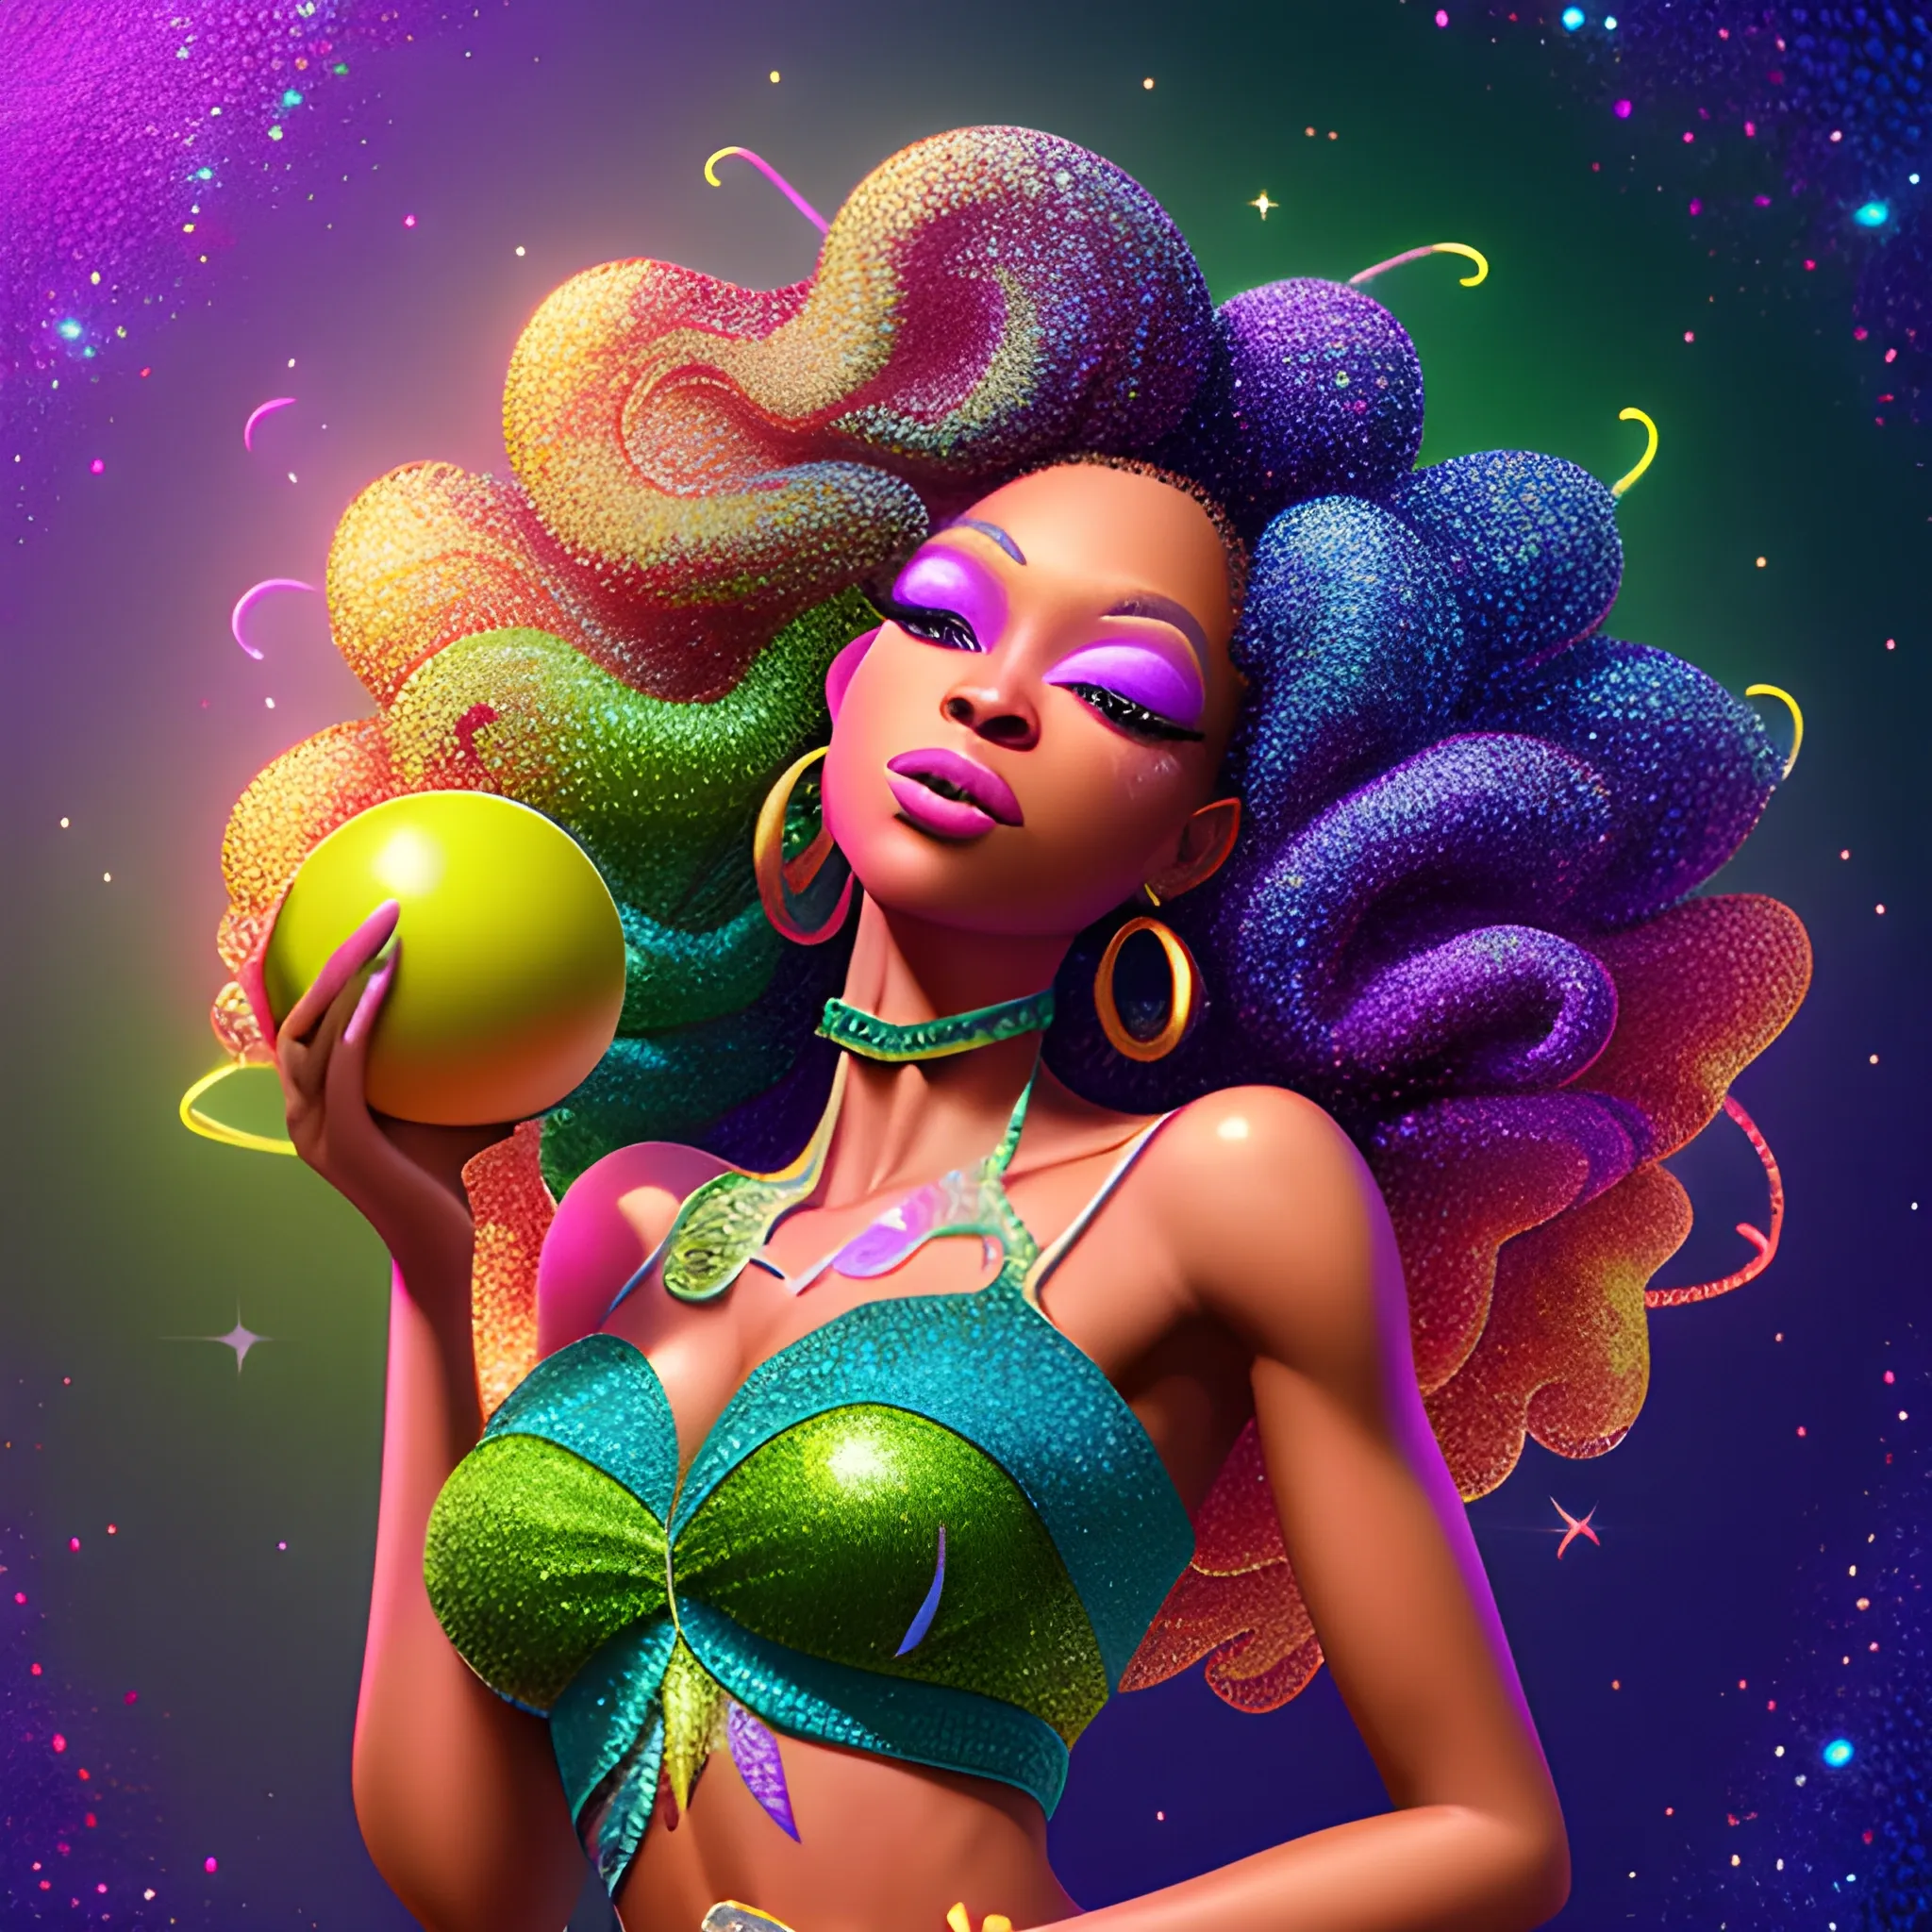 Charlotte Ayanna, perfect, anatomically correct perfect body, highly detailed beautiful face, green midriff dress, meticulously detailed multi-hued long dark curly hair, holding a purple ball in her hand; digital painting, smooth, sharp focus, colorful illustration, art by Lisa Frank, James R. Eads, artgerm and Maxfield Parrish; luminous color sparkles, glitter, neon, airbrush, Unreal Engine 5